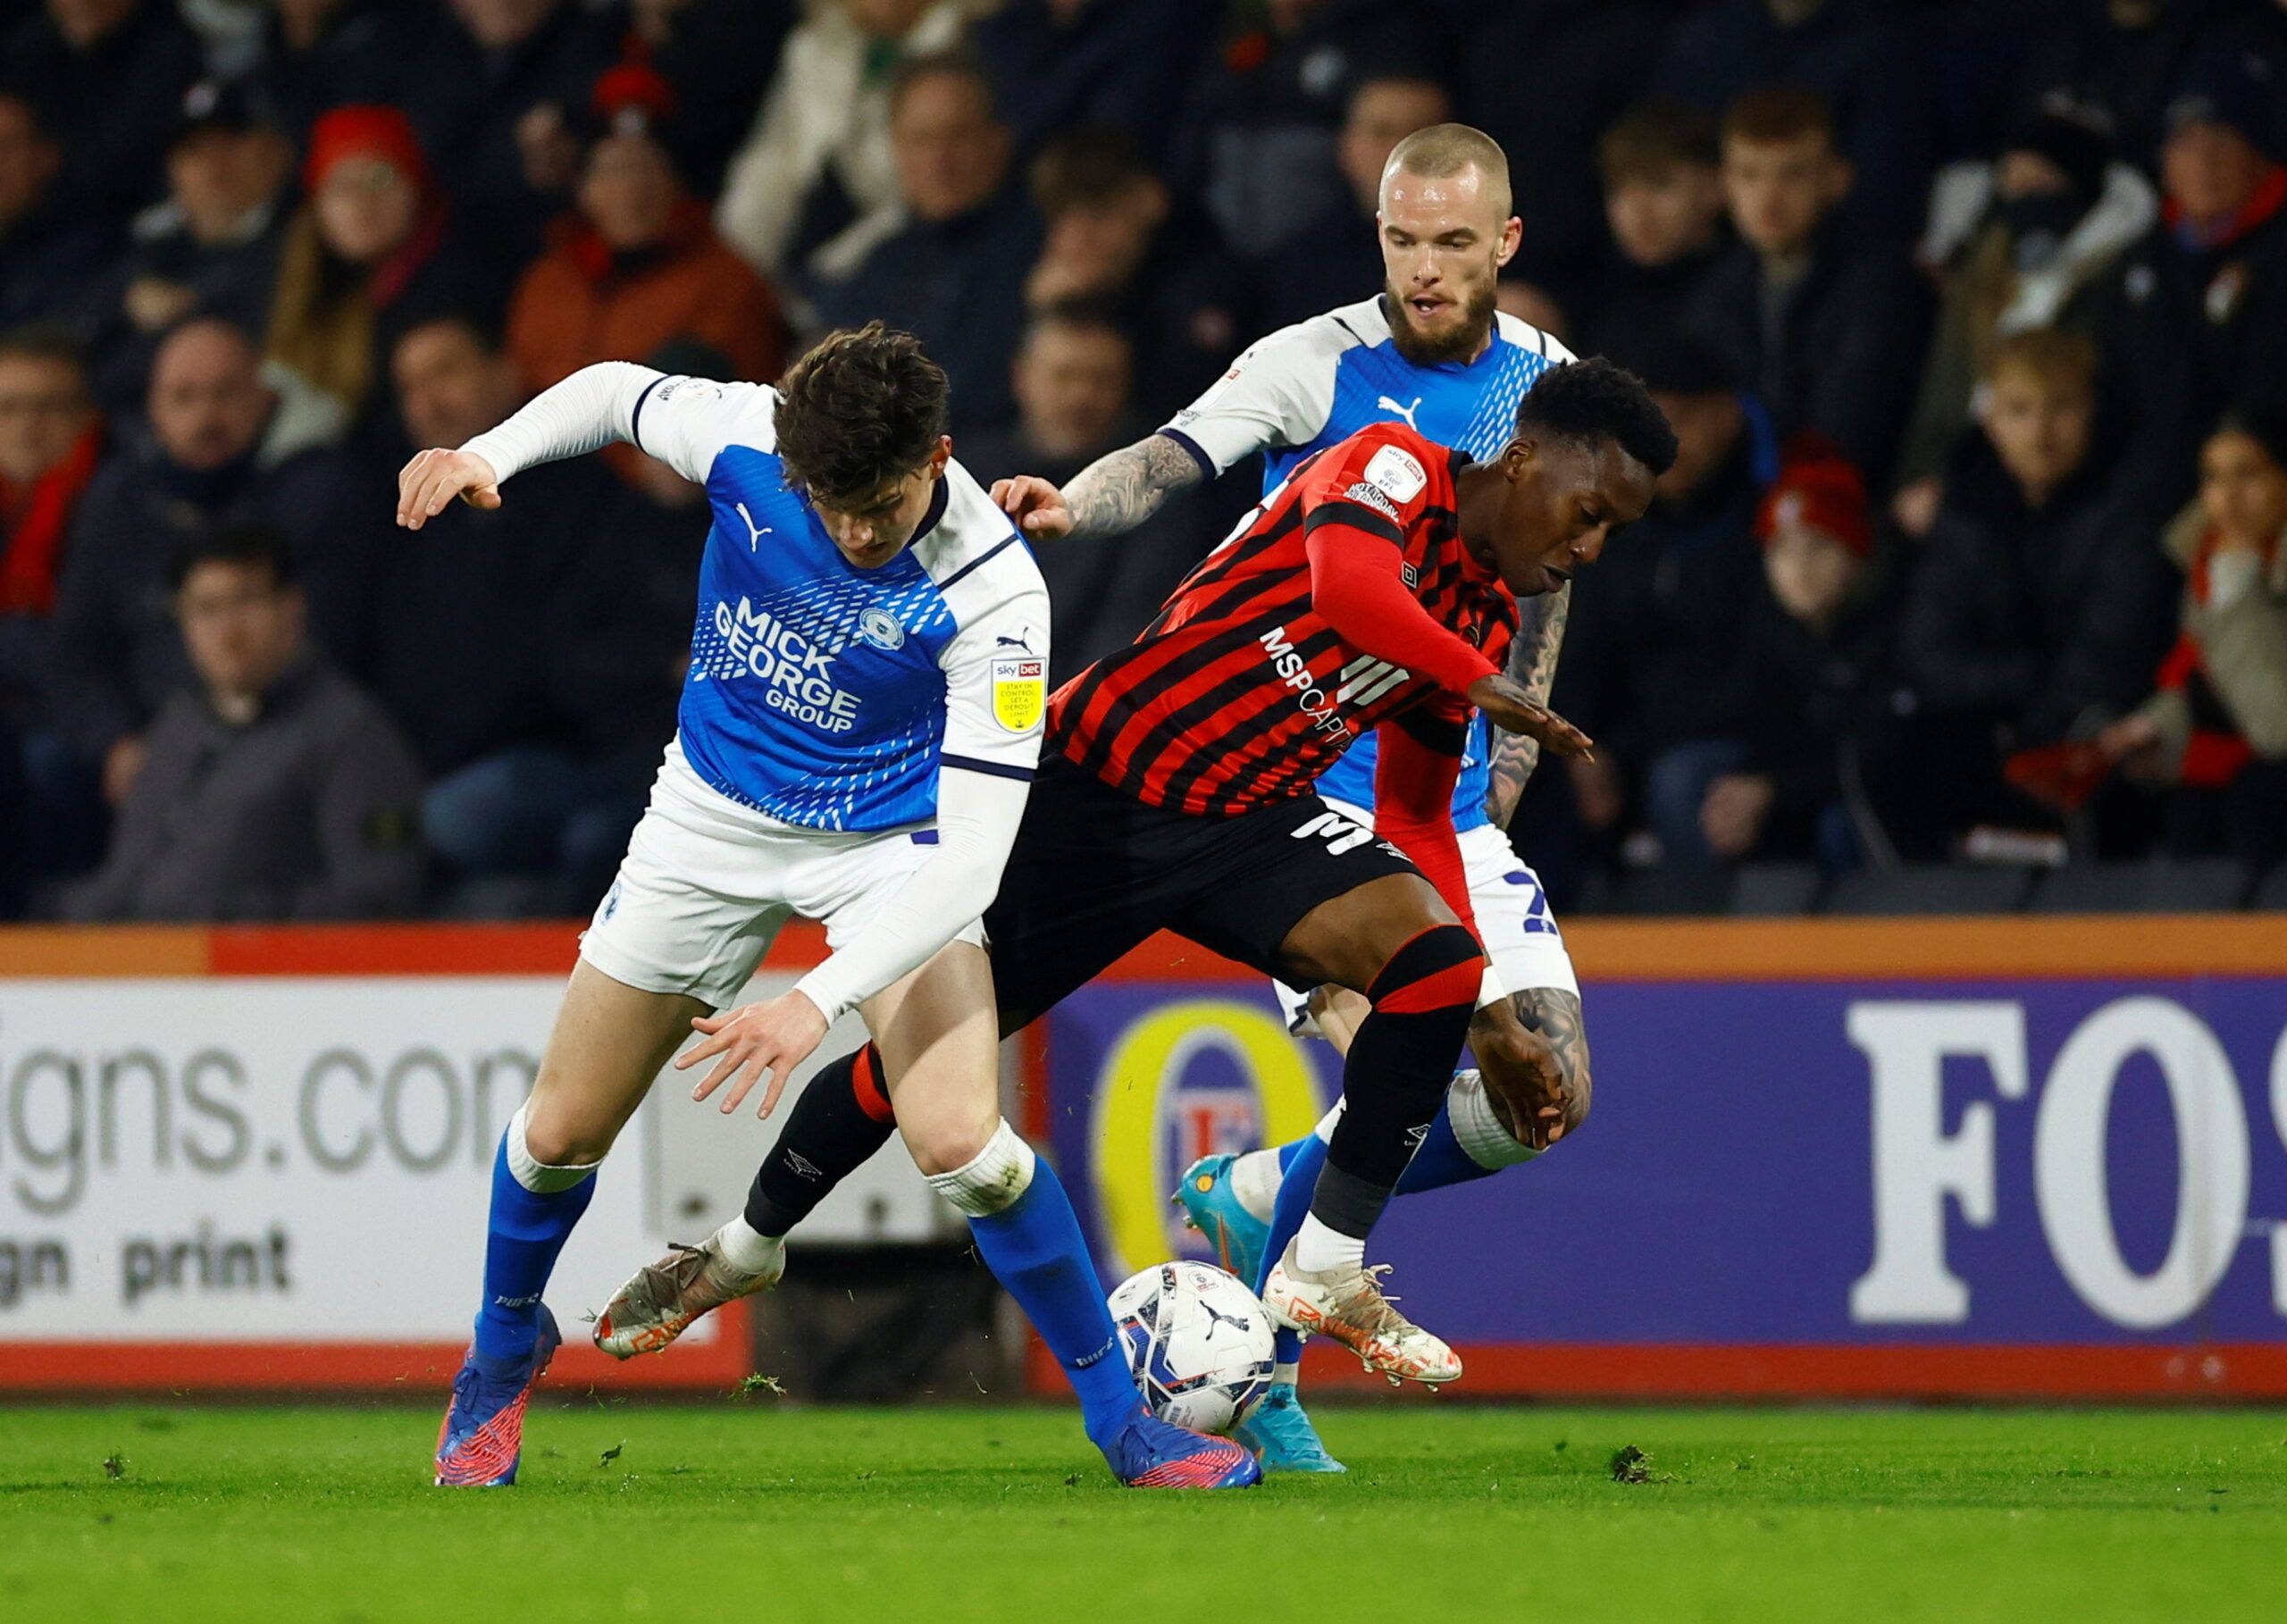 Soccer Football - Championship - AFC Bournemouth v Peterborough United - Vitality Stadium, Bournemouth, Britain - March 8, 2022   Bournemouth's Siriki Dembele in action with Peterborough United's Ronnie Edwards  Action Images/Andrew Boyers  EDITORIAL USE ONLY. No use with unauthorized audio, video, data, fixture lists, club/league logos or 